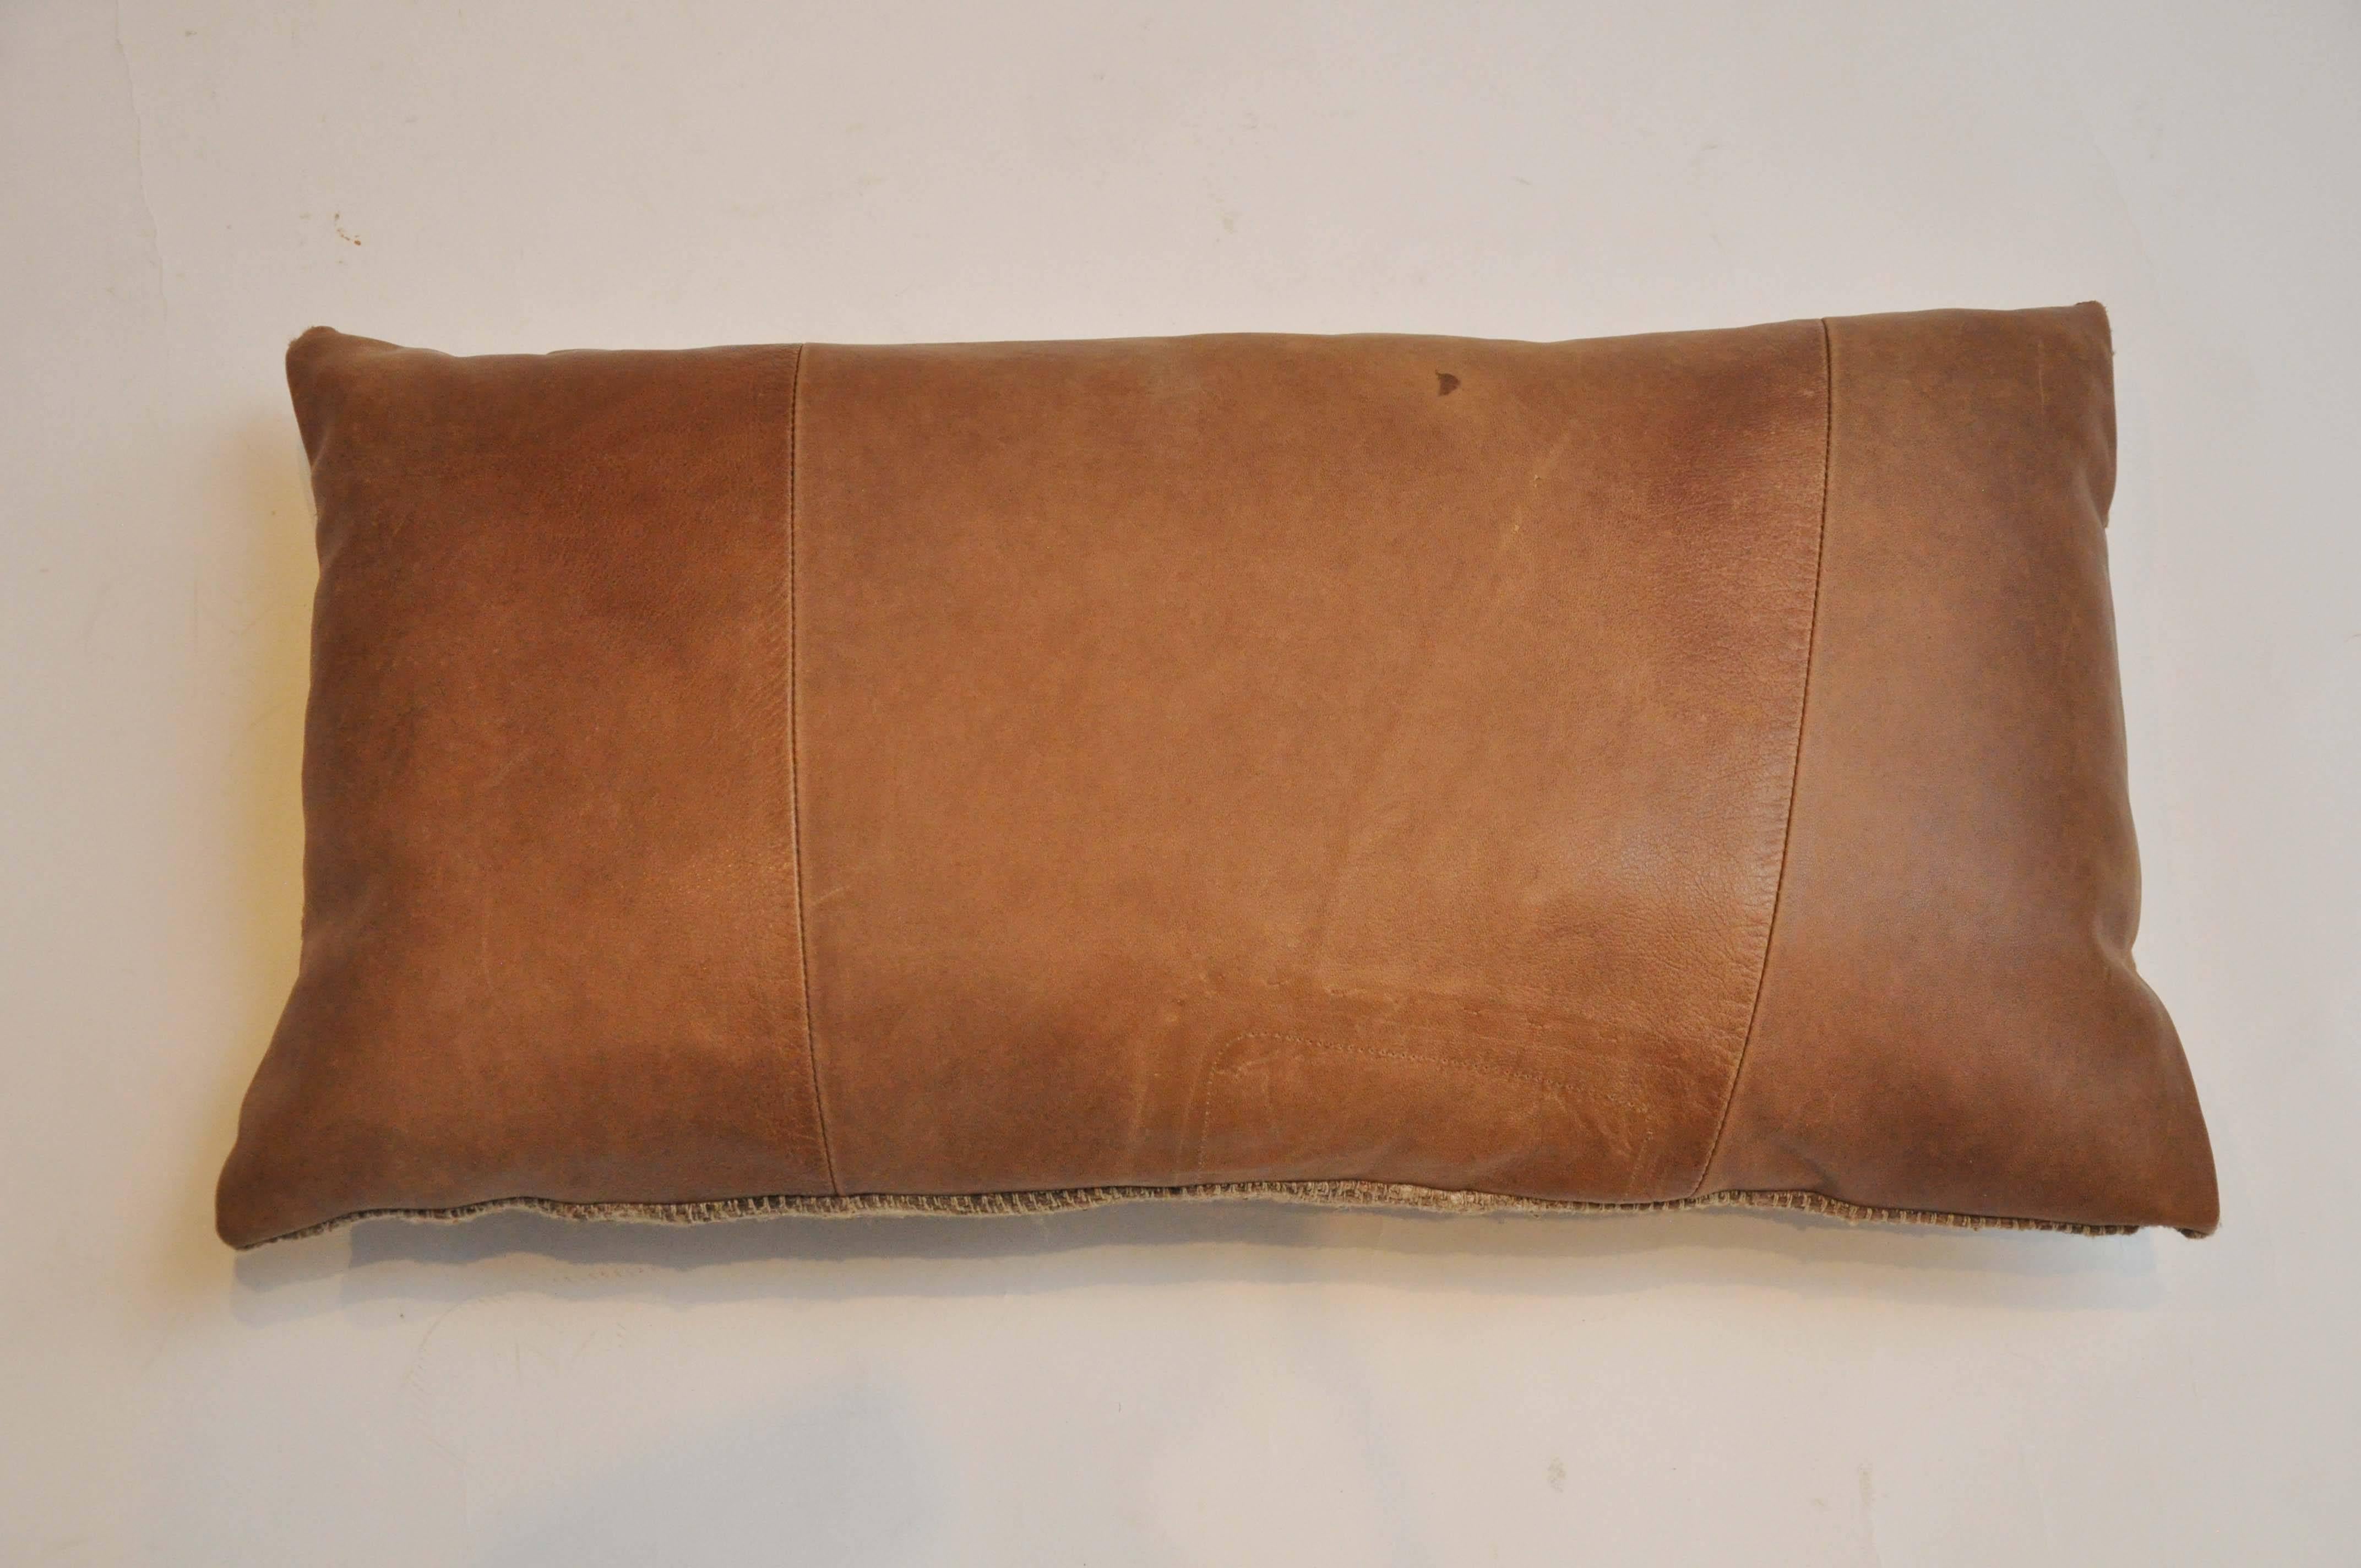 20th century vintage double sided kidney or accent pillow. One side is a beautiful carmel colored vintage leather and the reverse side is a textured woven. Knife edge construction and zipper closure.

Dimension: 12